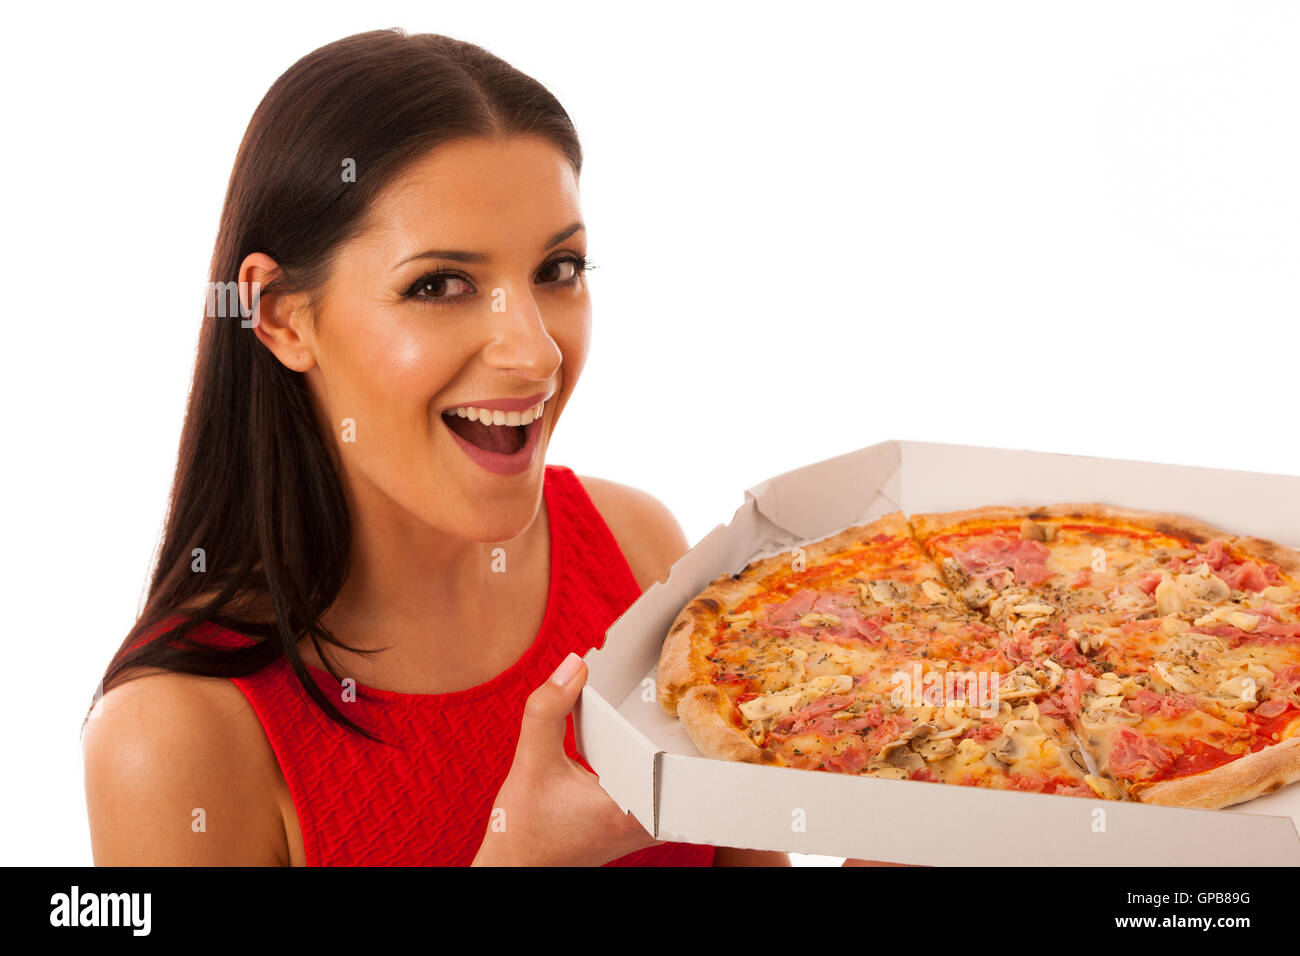 A smiling chef holding a pizza in a take out box Stock Photo - Alamy